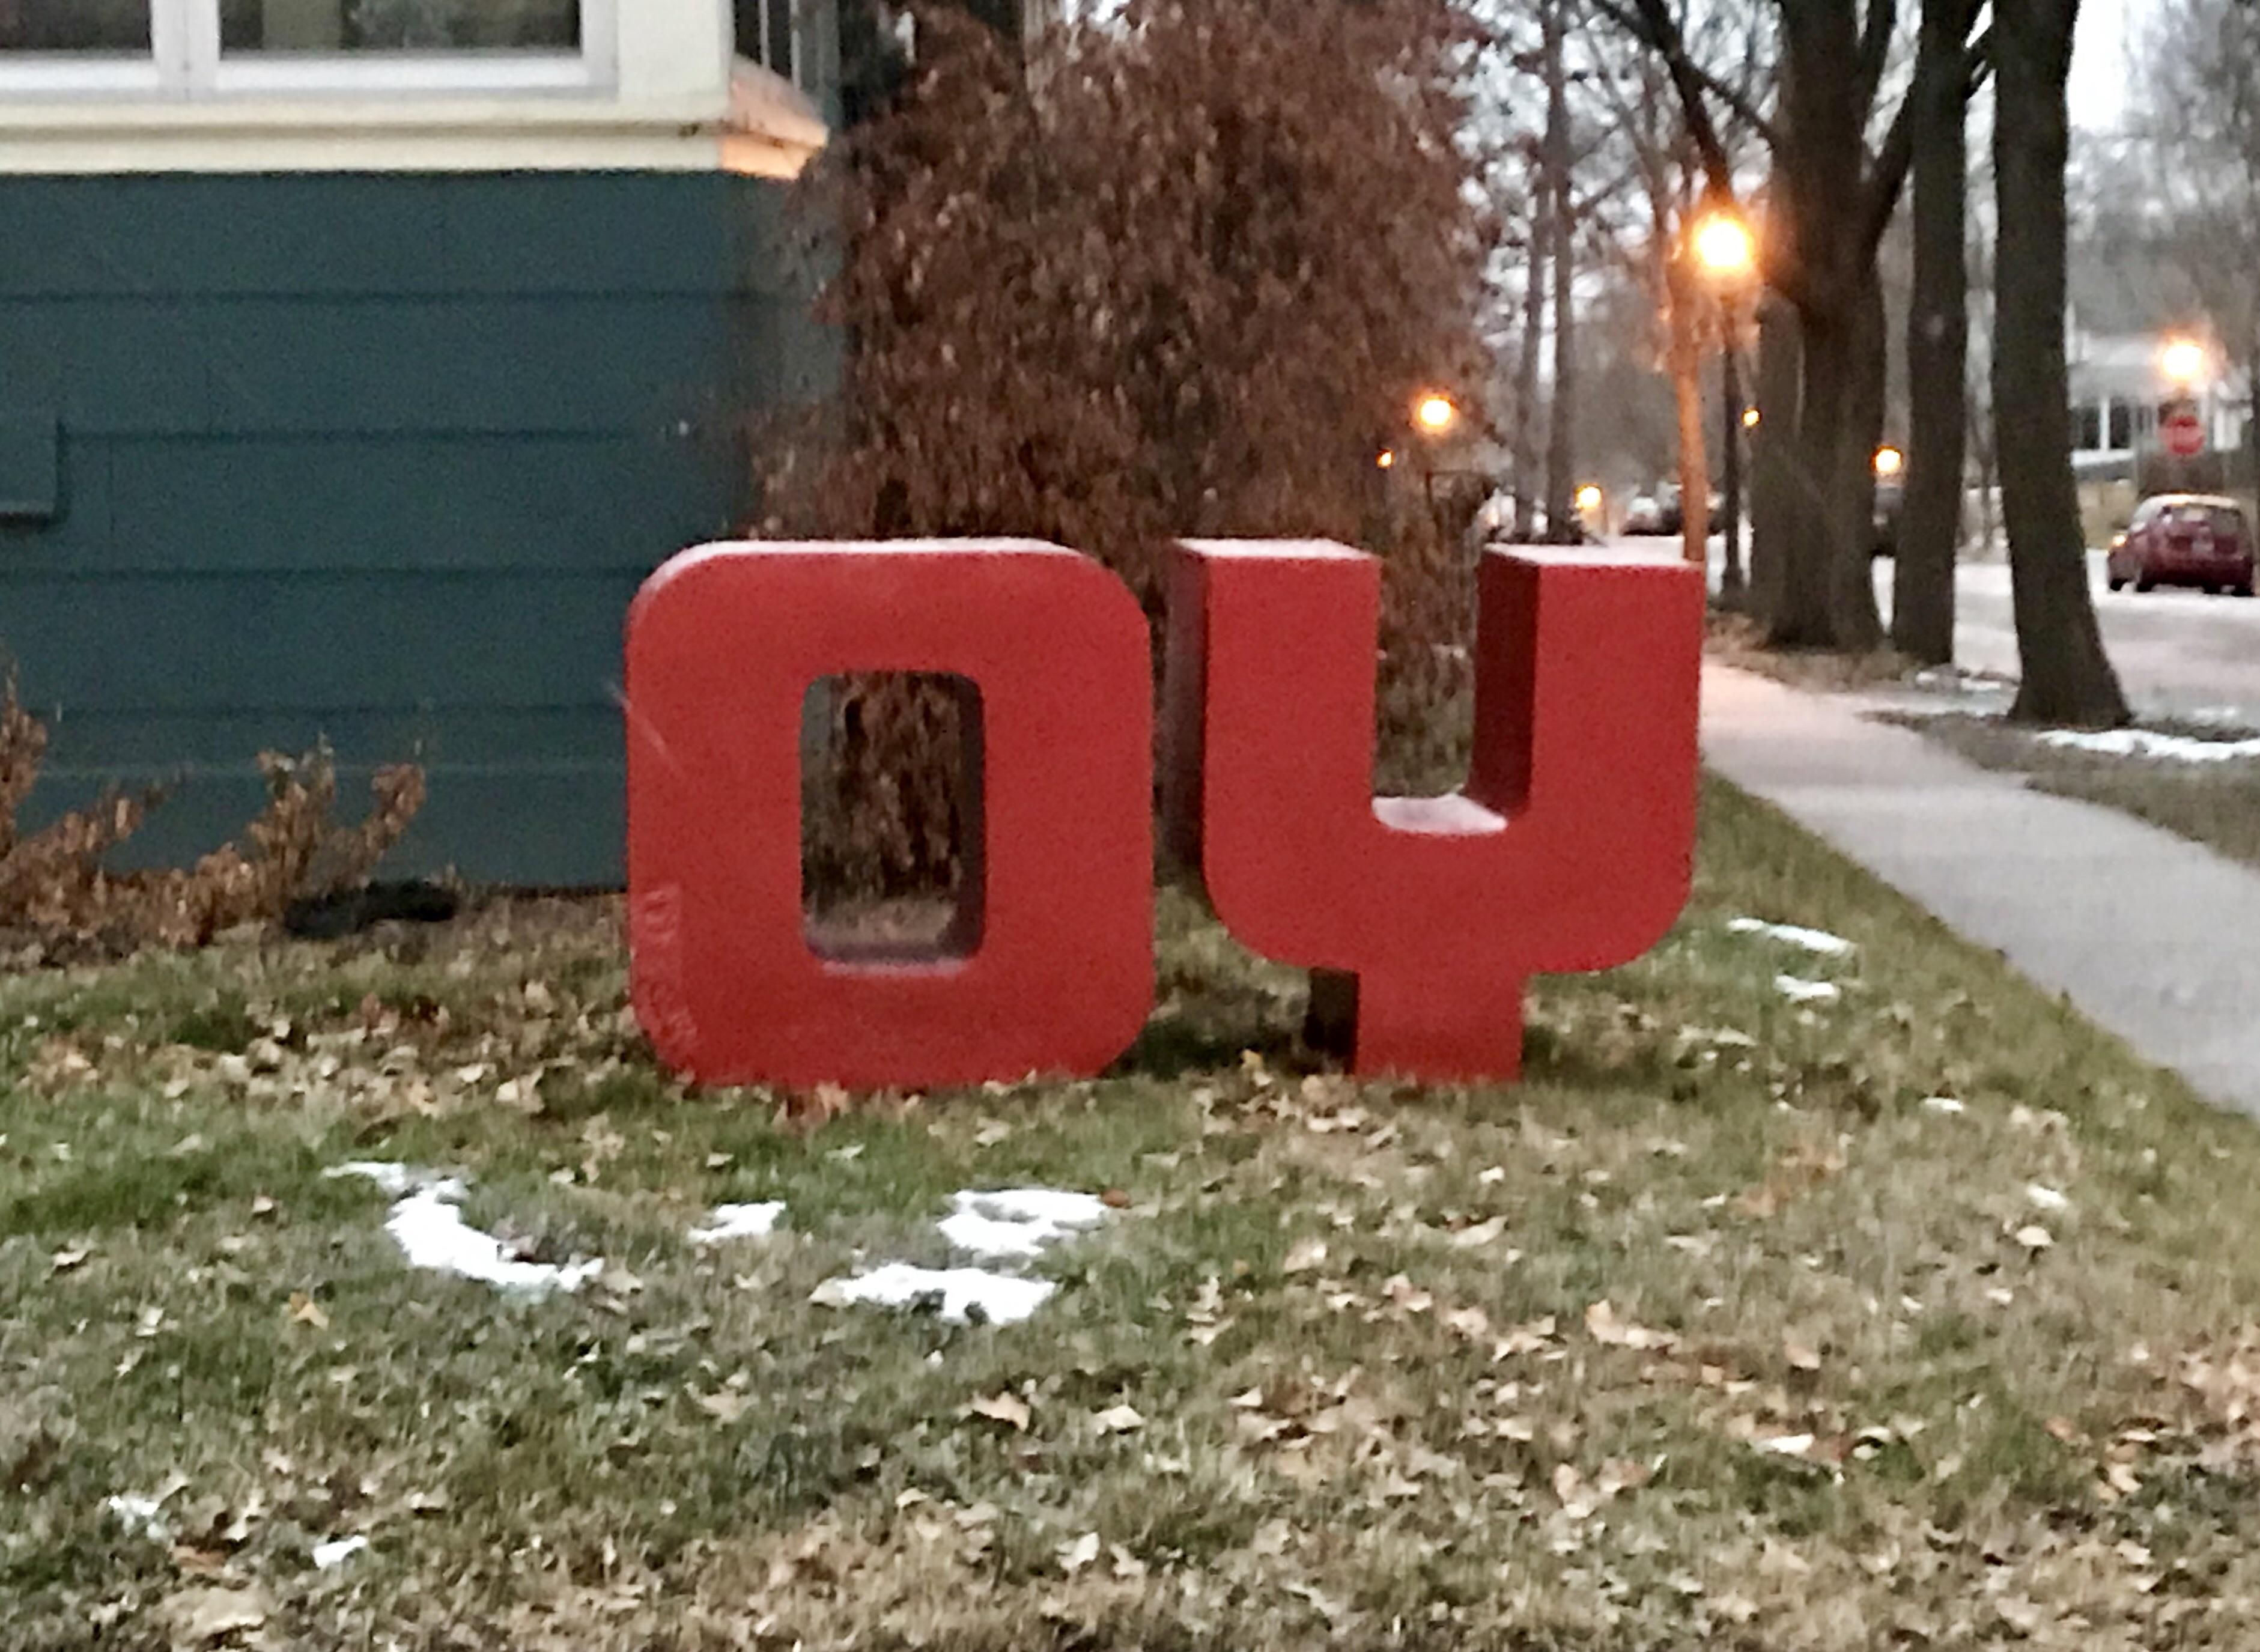 Either someone stole the ‘J’ or my Jewish neighbors have a sense of humor.